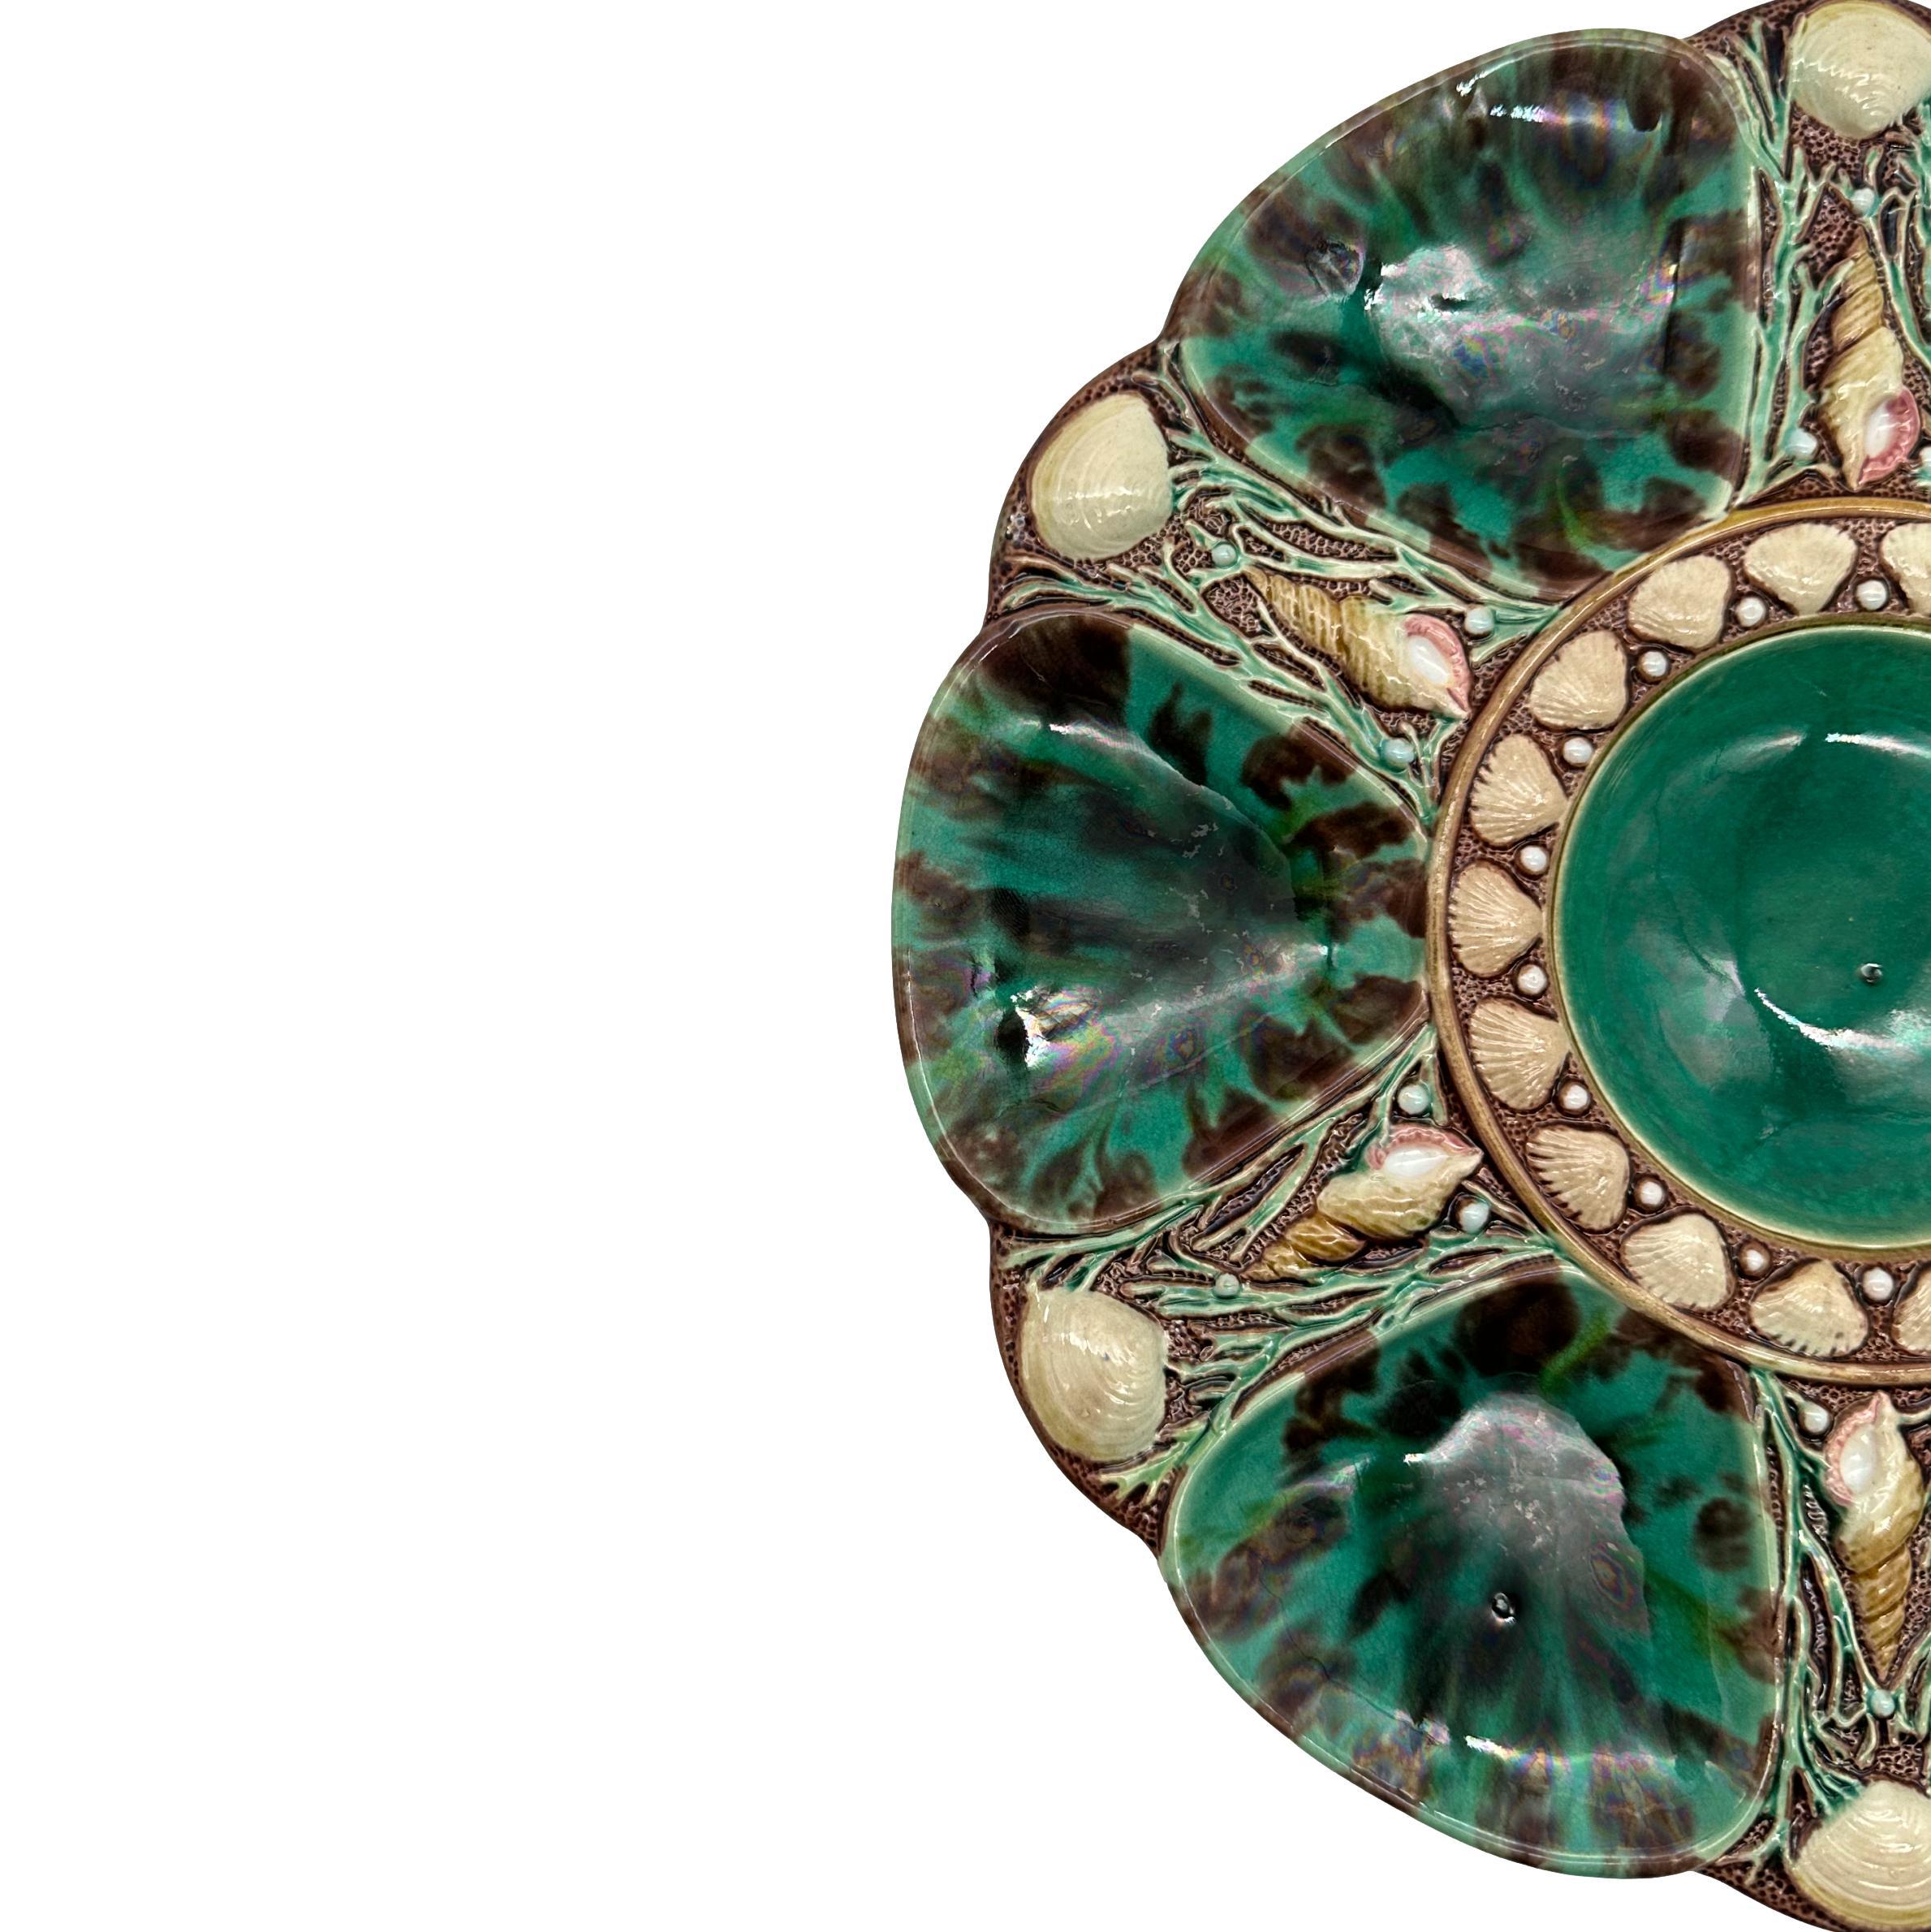 Minton Majolica Oyster Plate, the relief-molded dish with six wells glazed in green and brown mottled leopard spots, each well separated by shells and seaweed, the center well glazed in green and banded with shells, the reverse with impressed and